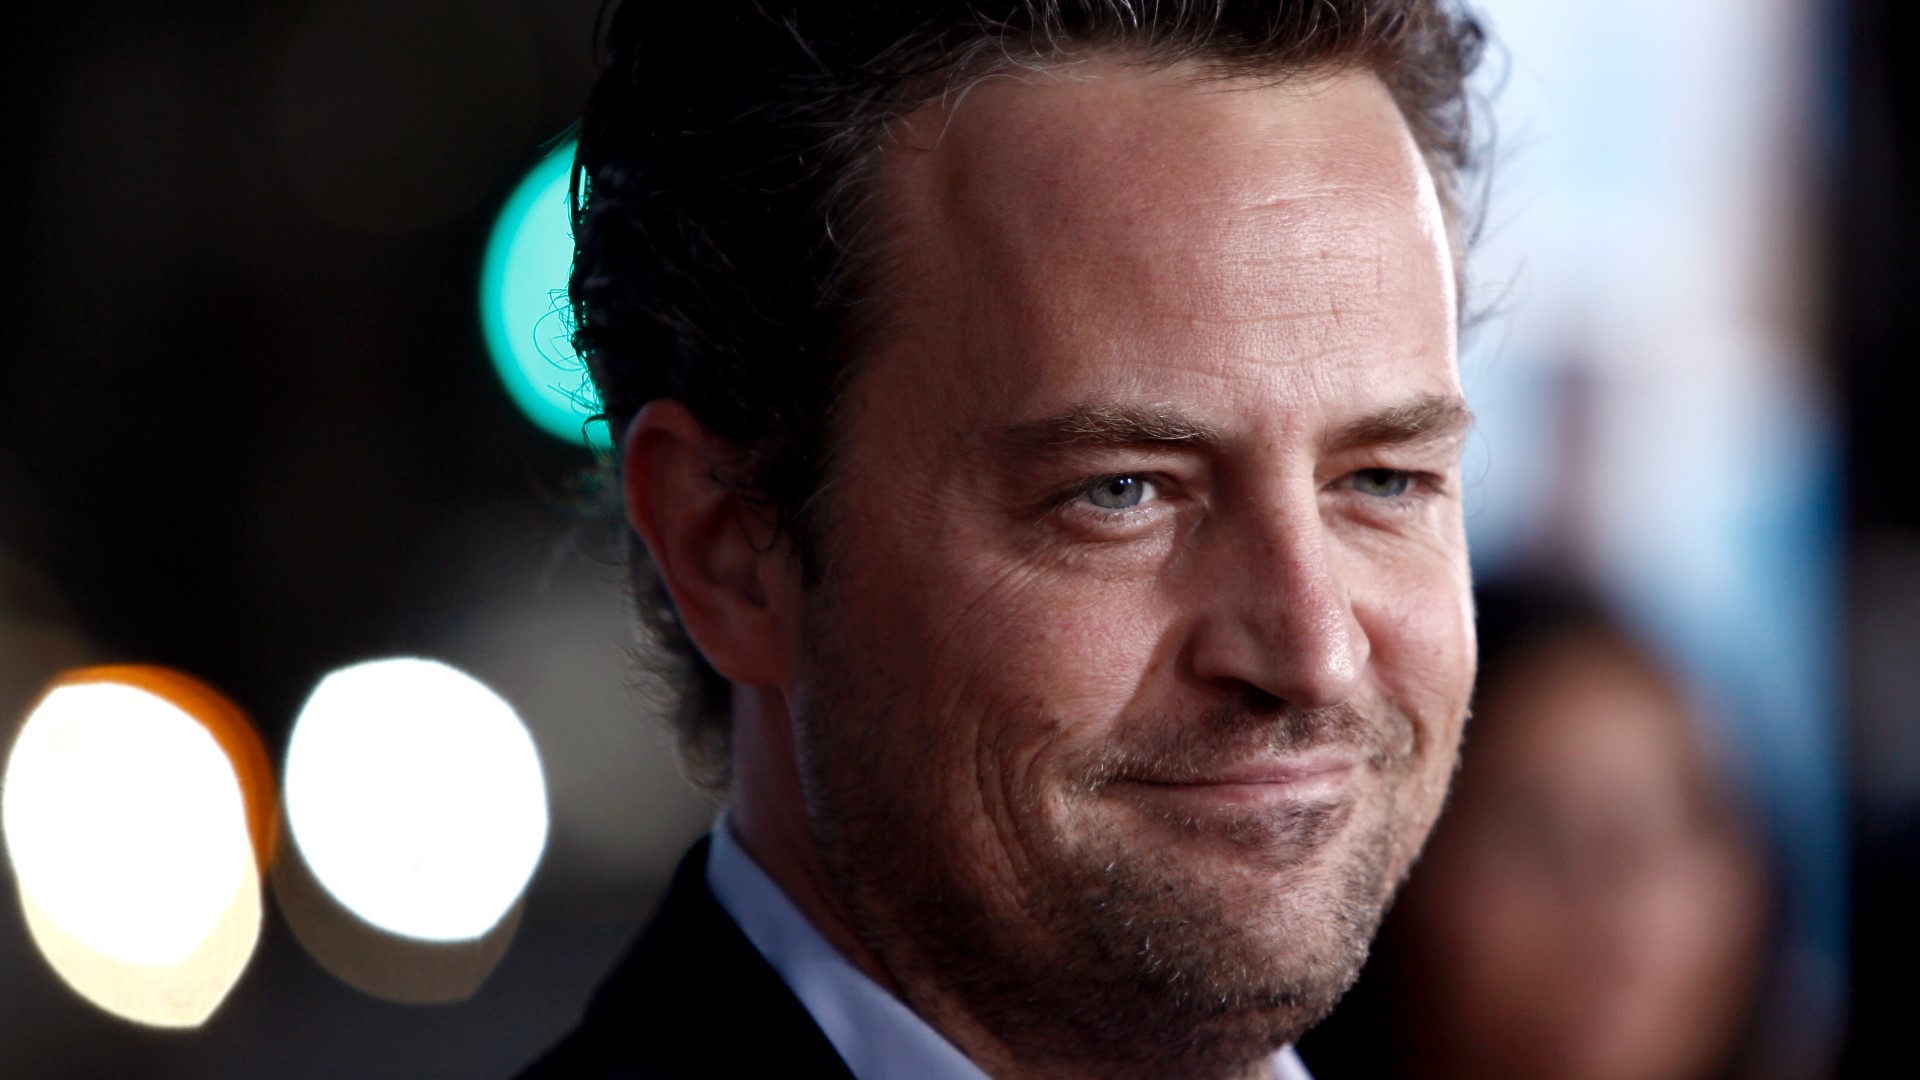 Actor Matthew Perry was open about his struggles with addition and shared his story with the hopes that he could just help one person.